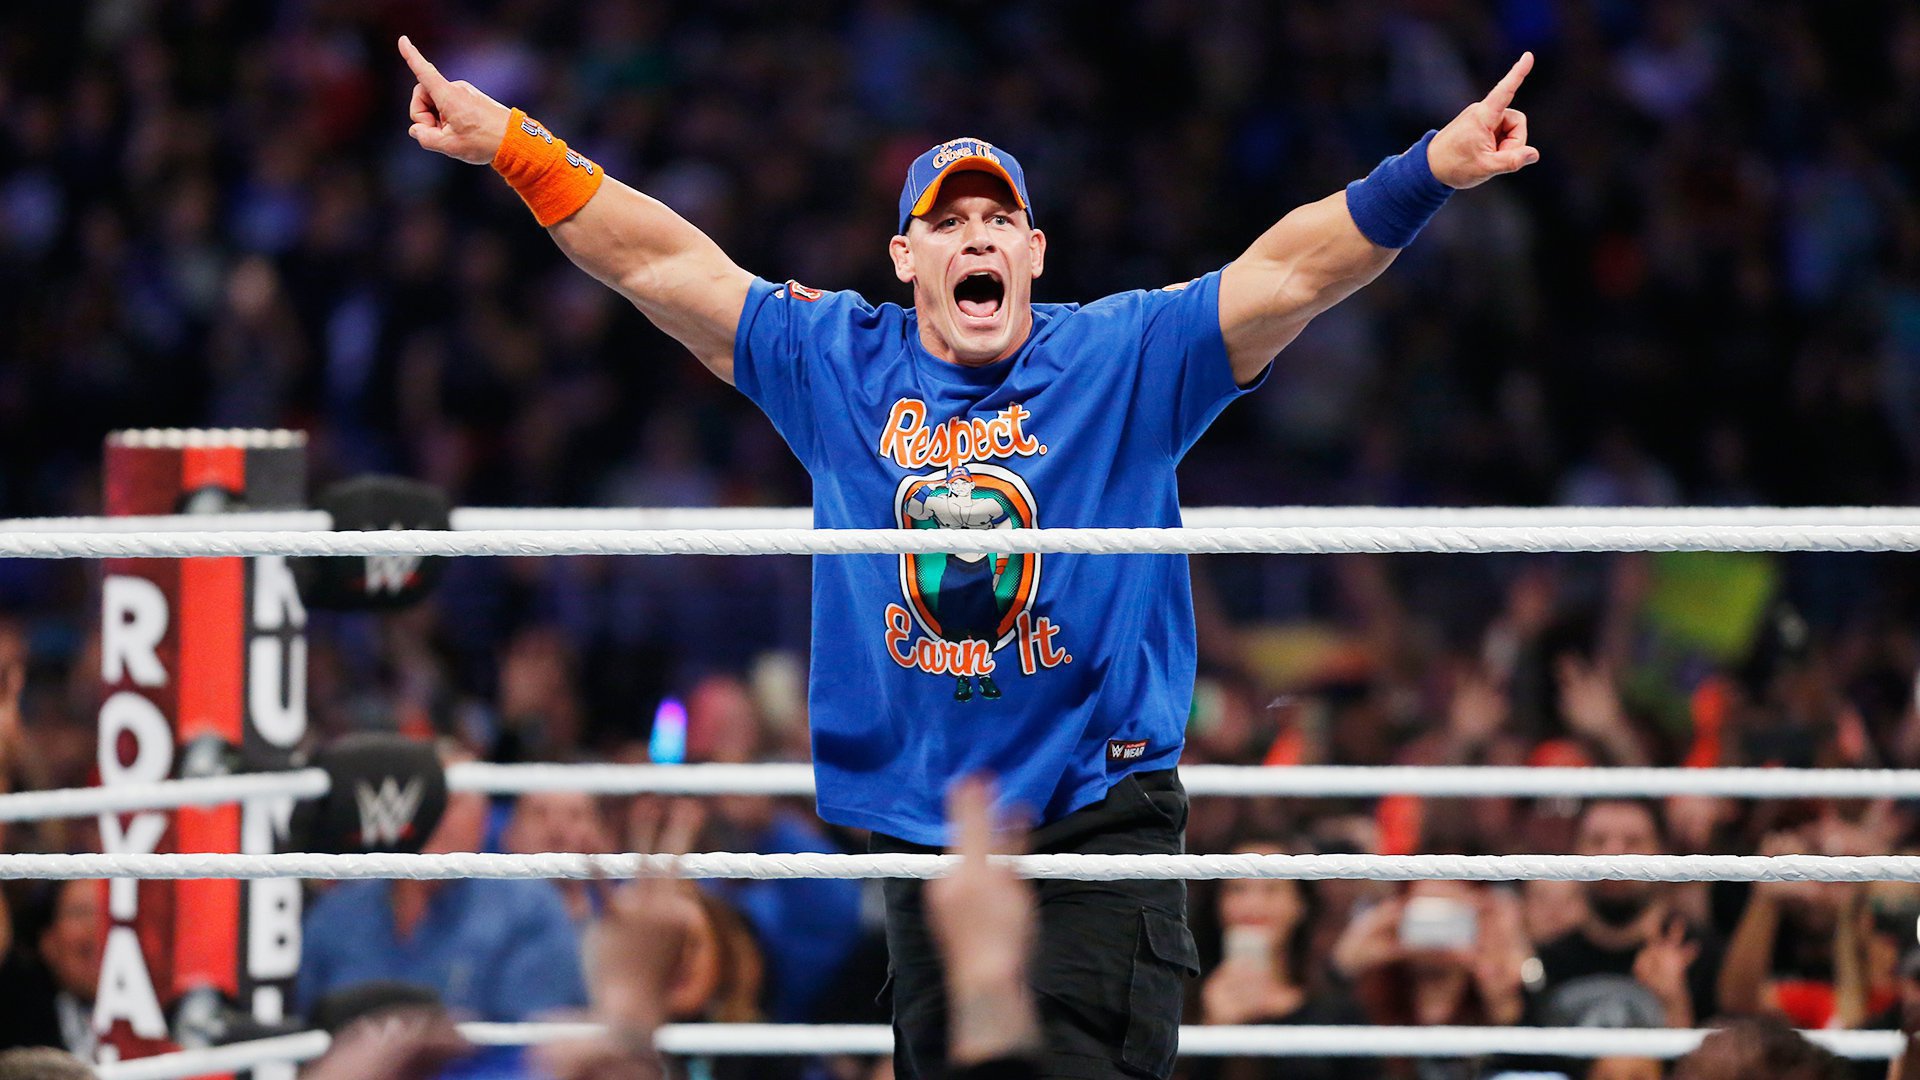 Is John Cena returning to SmackDown LIVE on July 4? WWE